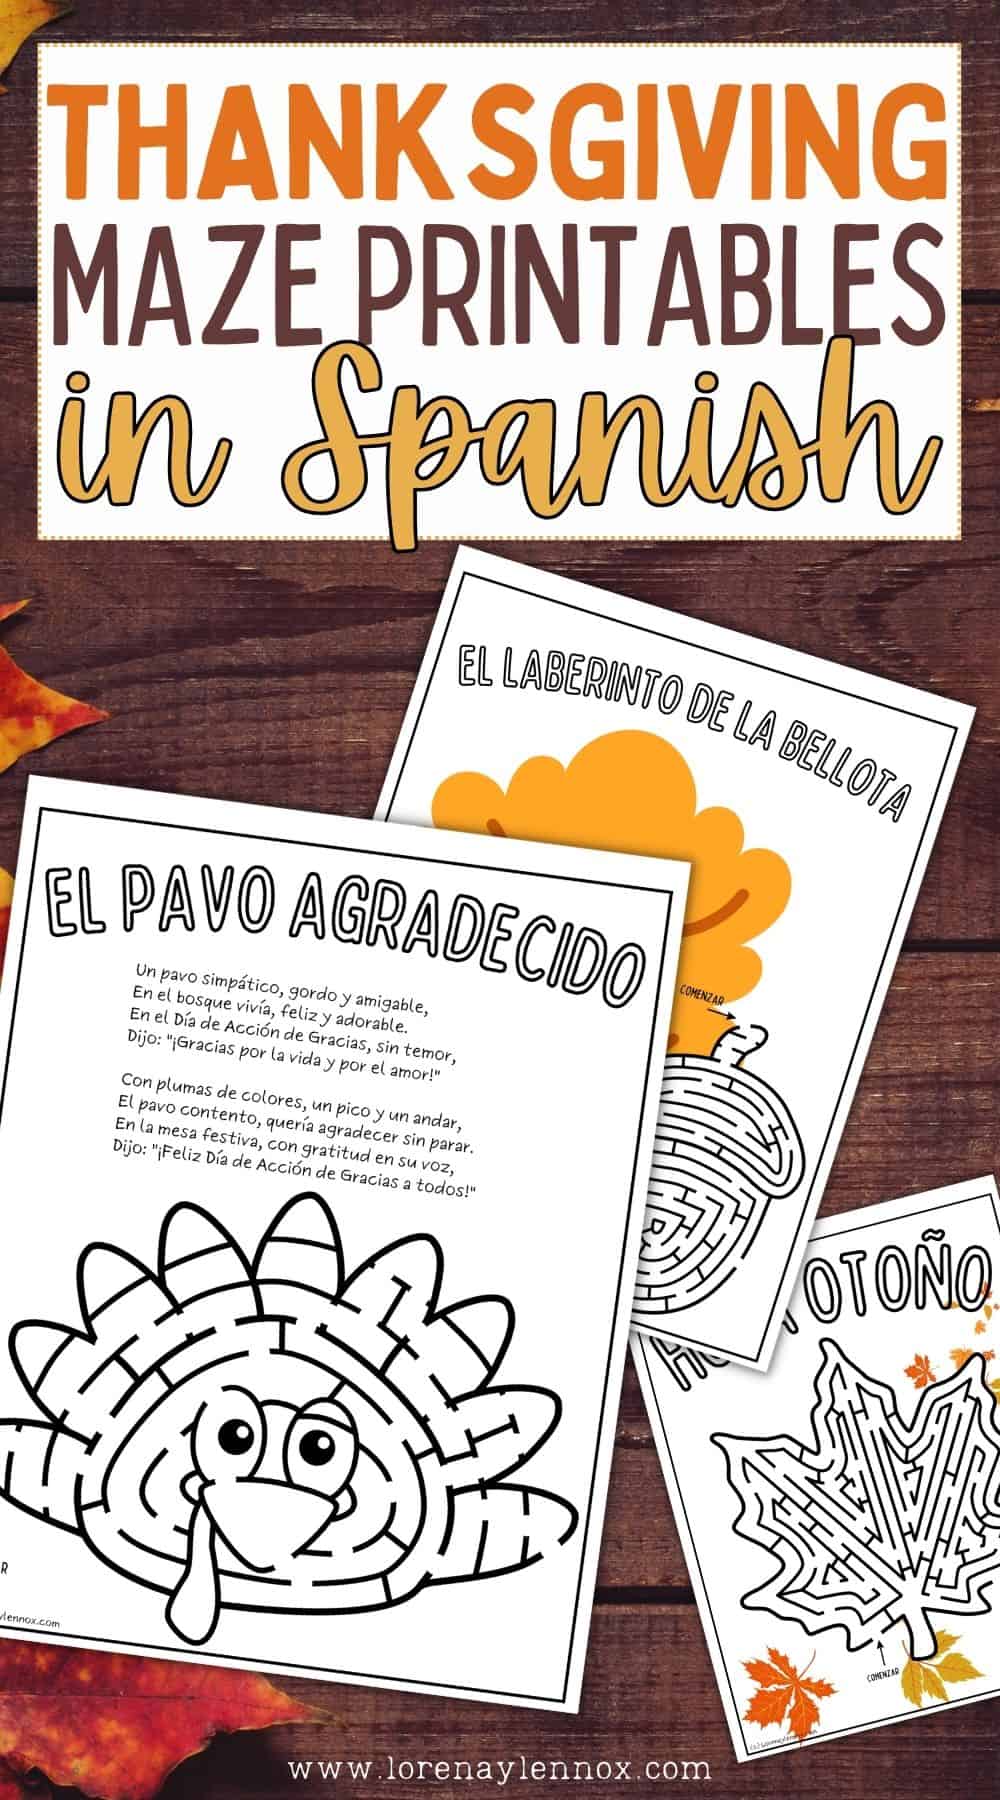 Explore our Thanksgiving maze printable in Spanish for a fun holiday activity! Help kids practice their language skills while navigating through this entertaining maze. Download and enjoy!